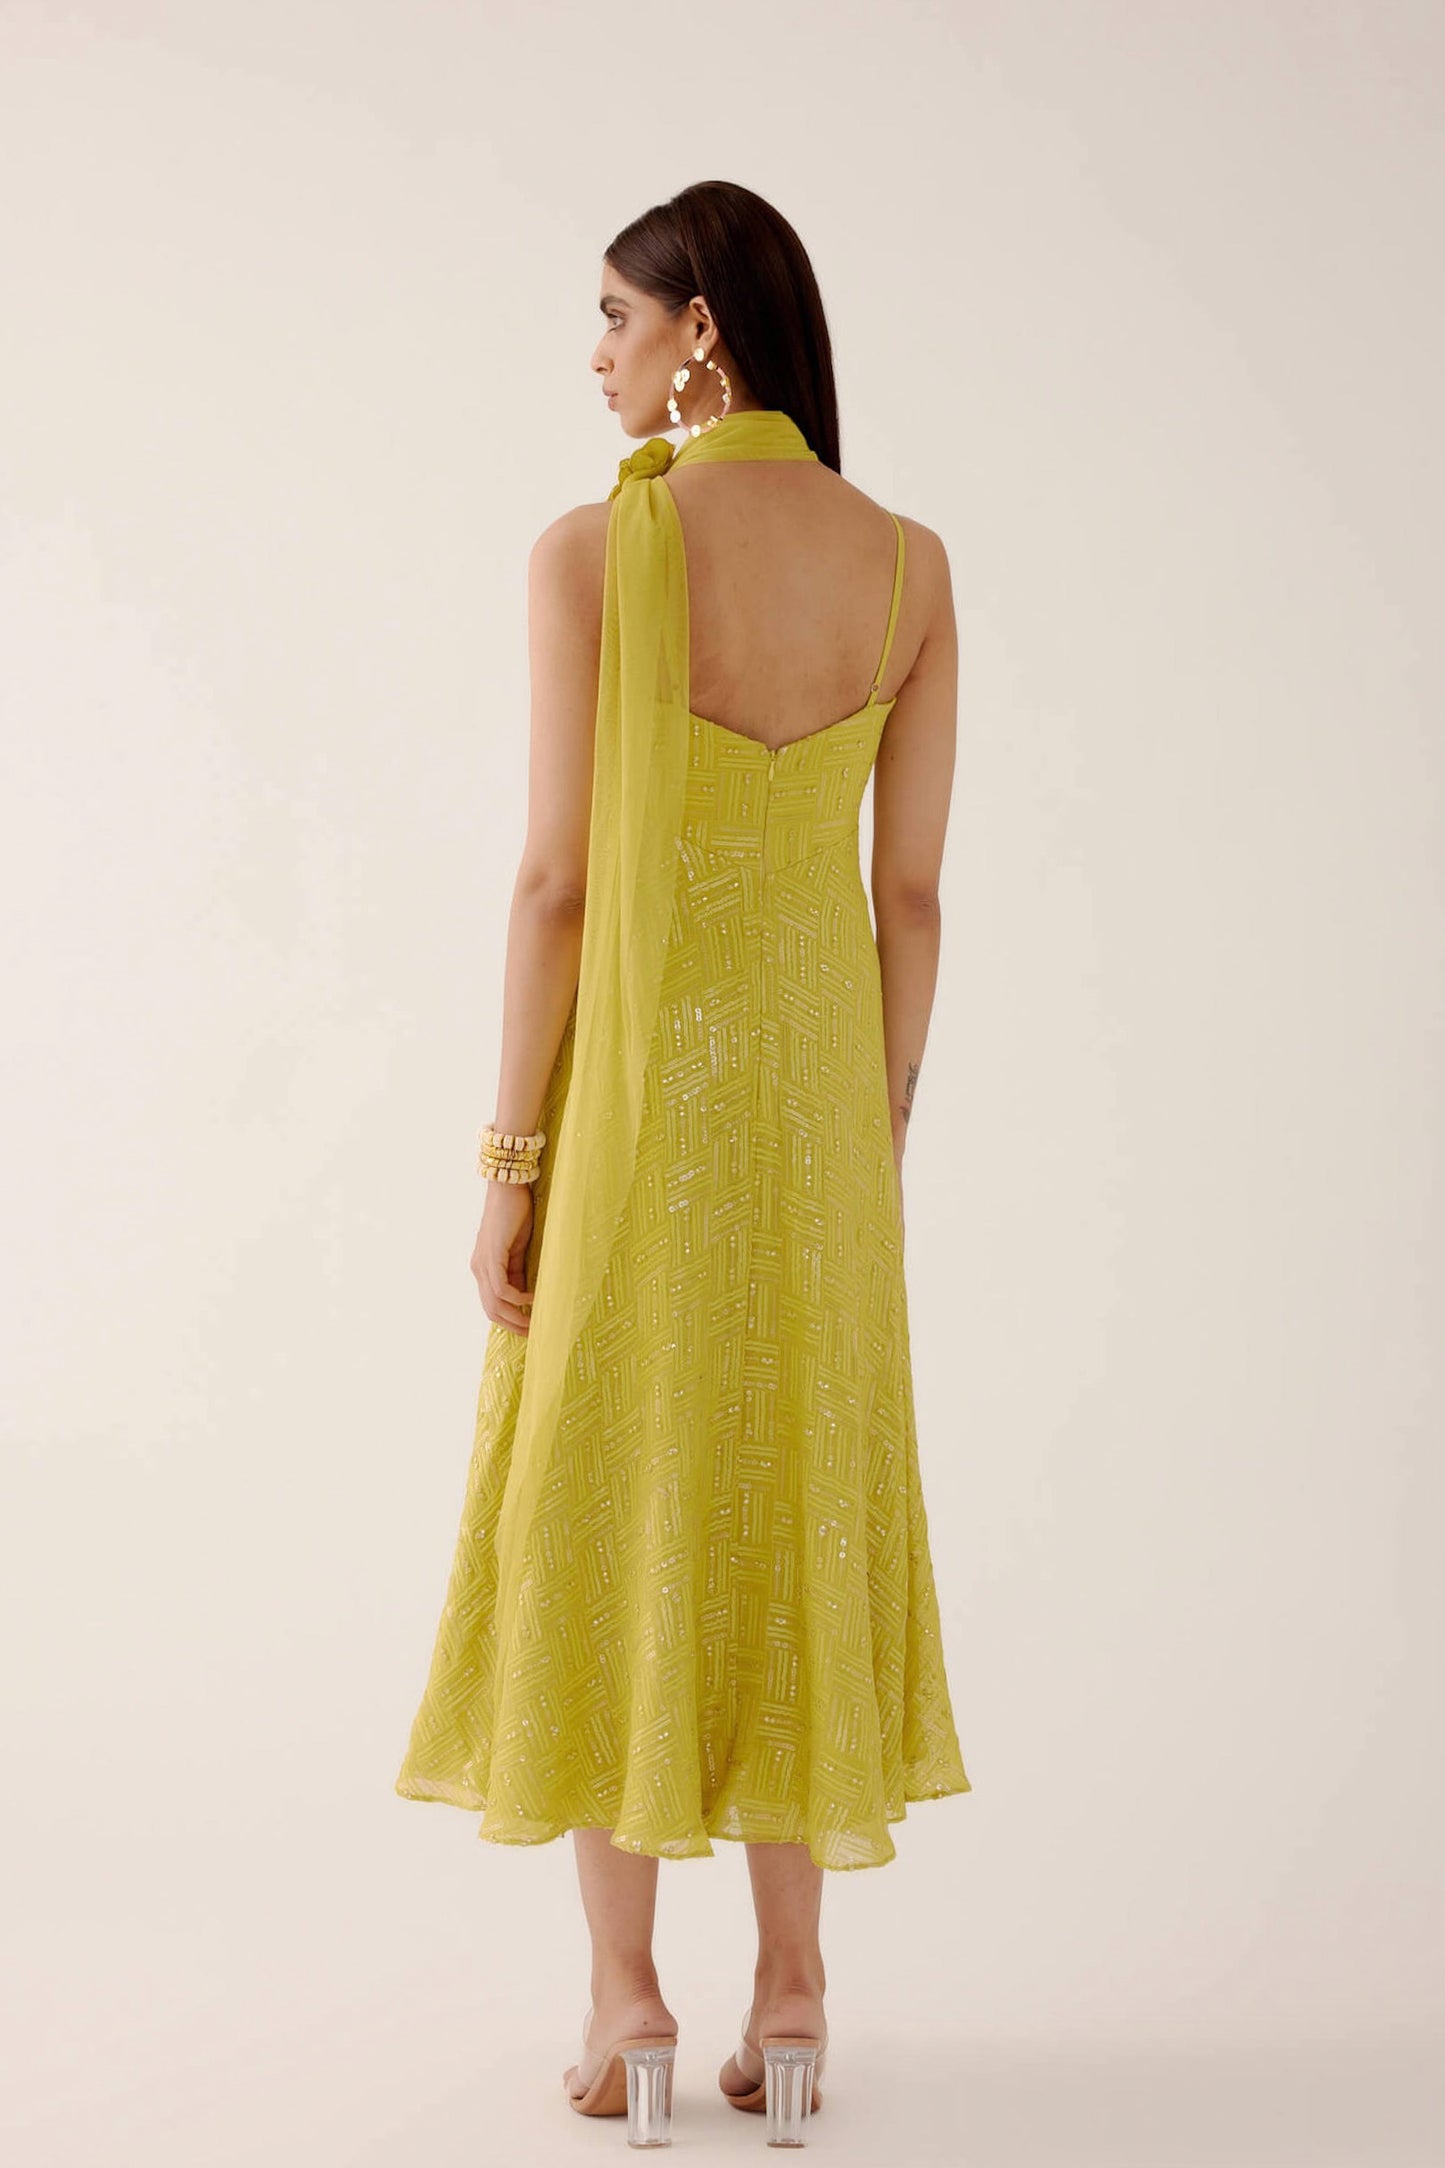 The Zara Dress is a midi-length dress with delicate sequin work throughout. The dress comes with a skinny dupatta and a detachable, handmade rosette clip. 